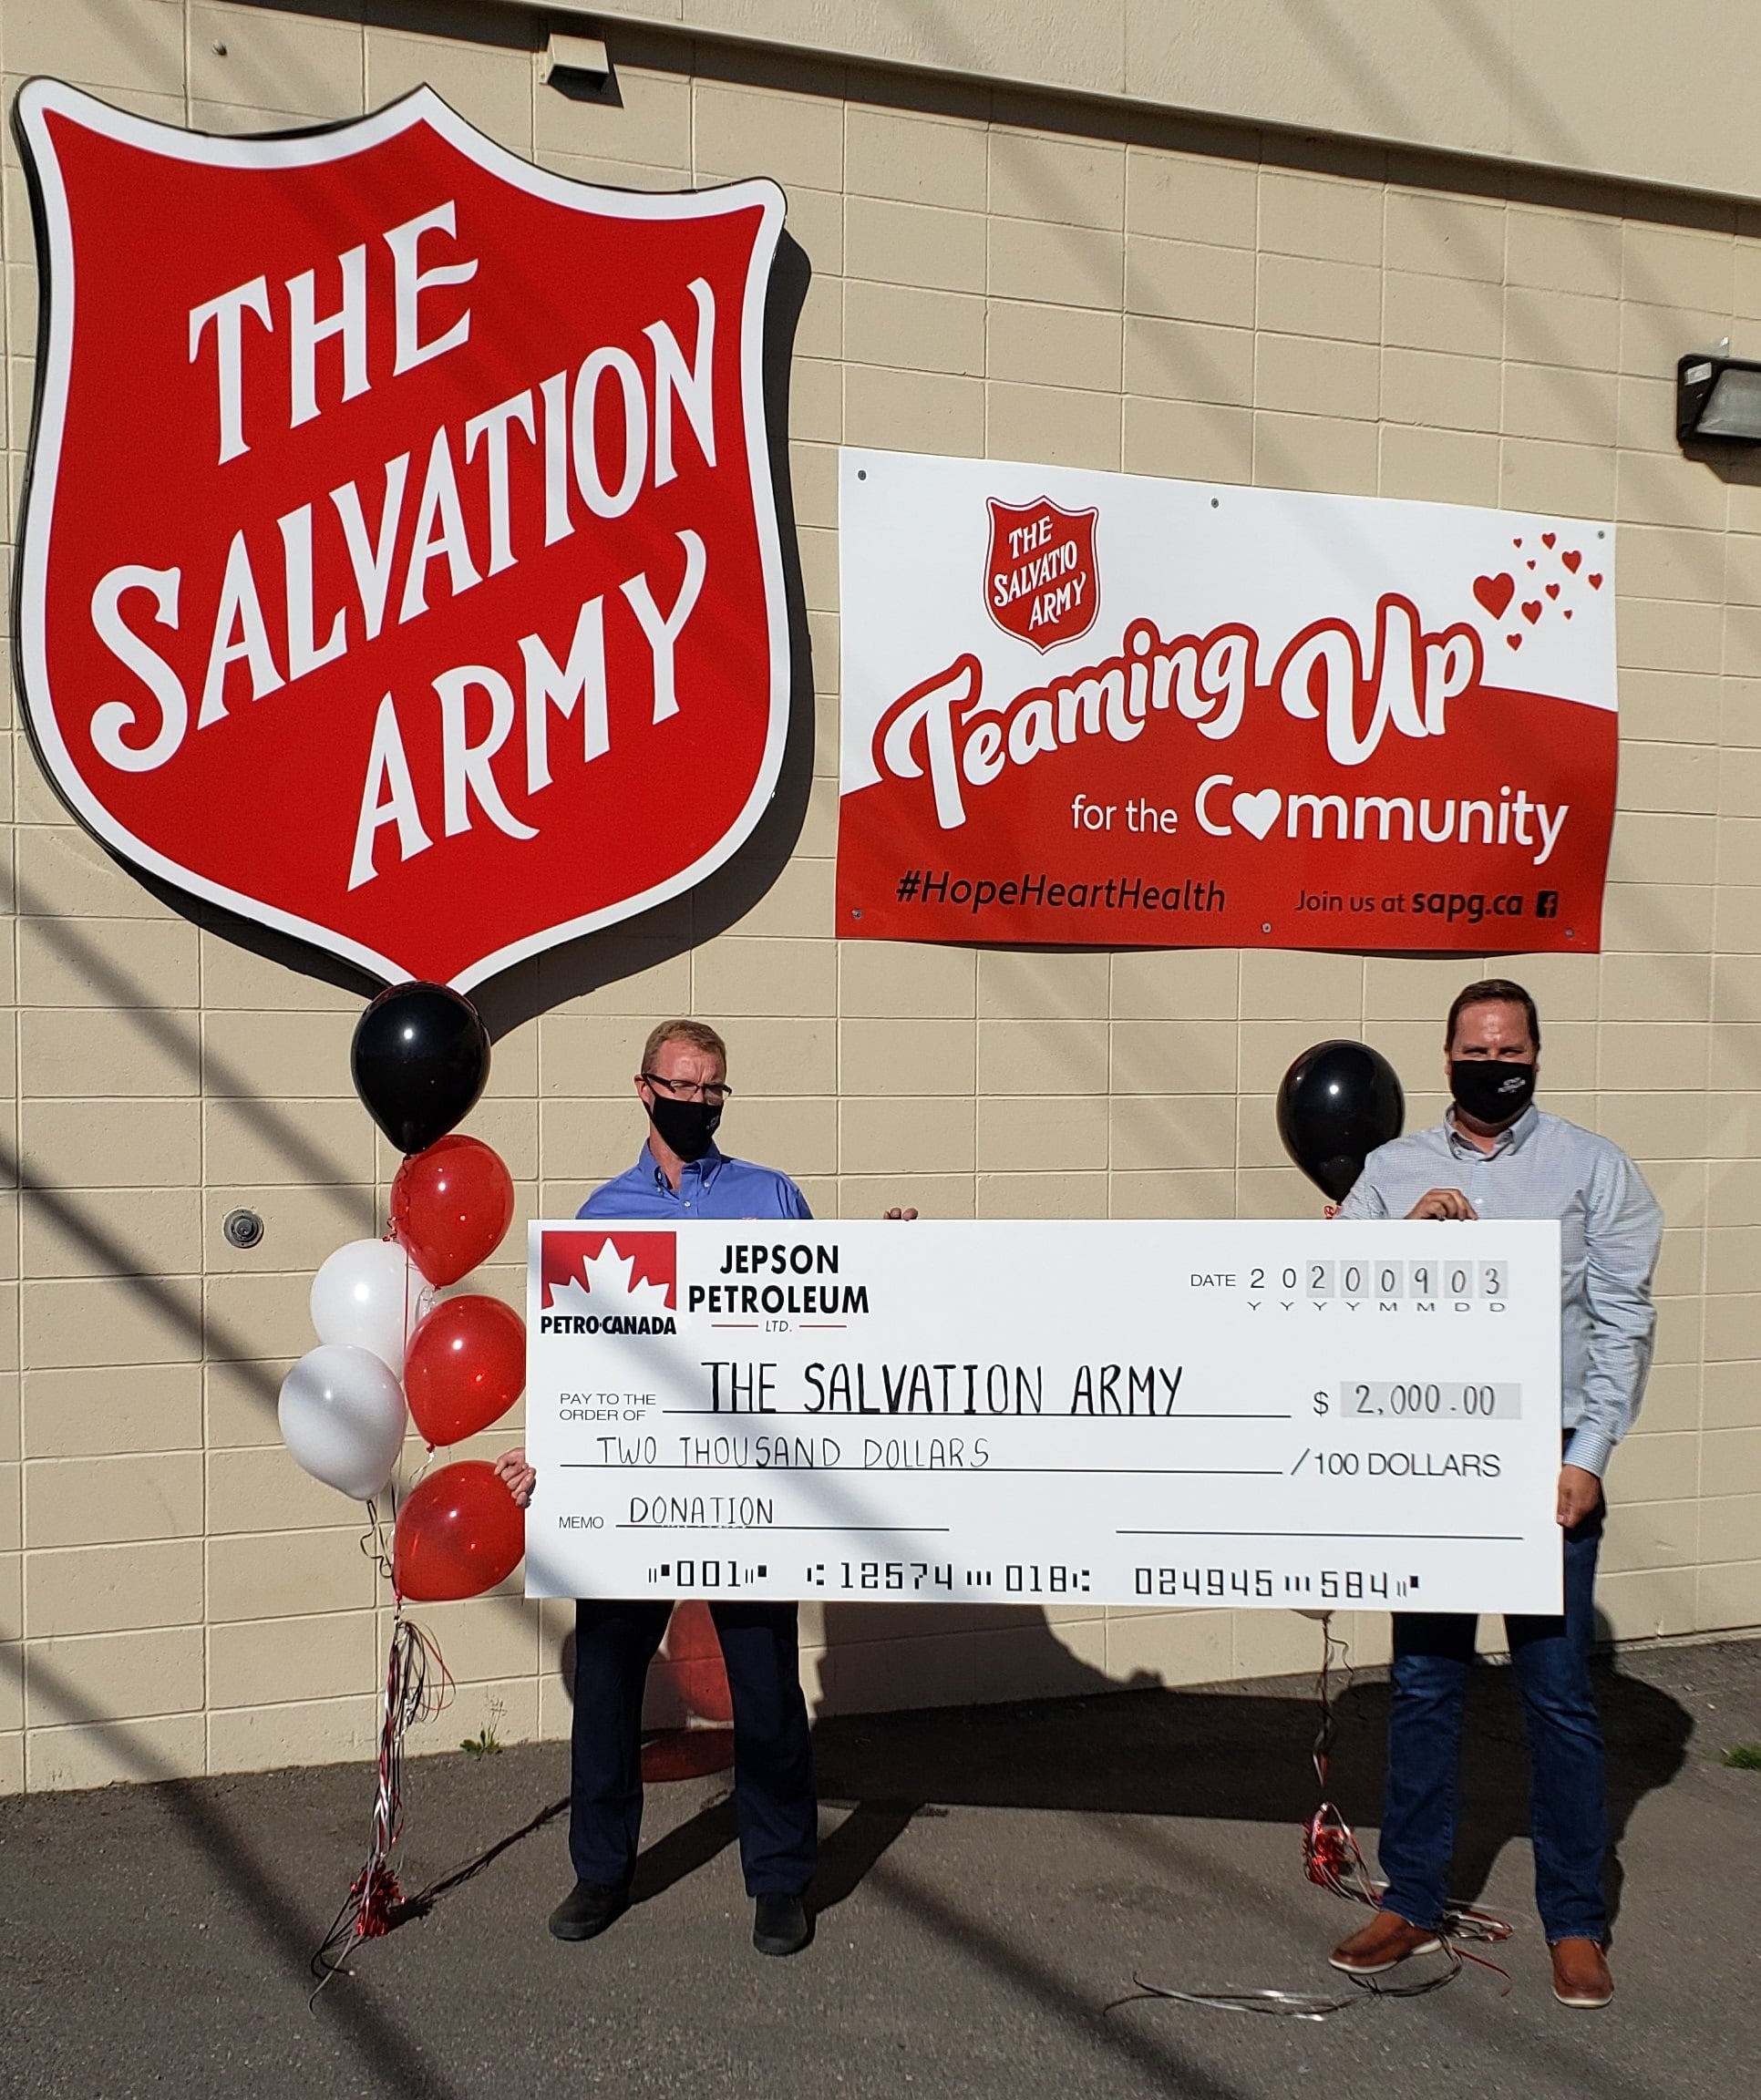 Jepson Petroleum Ltd. supports the Salvation Army